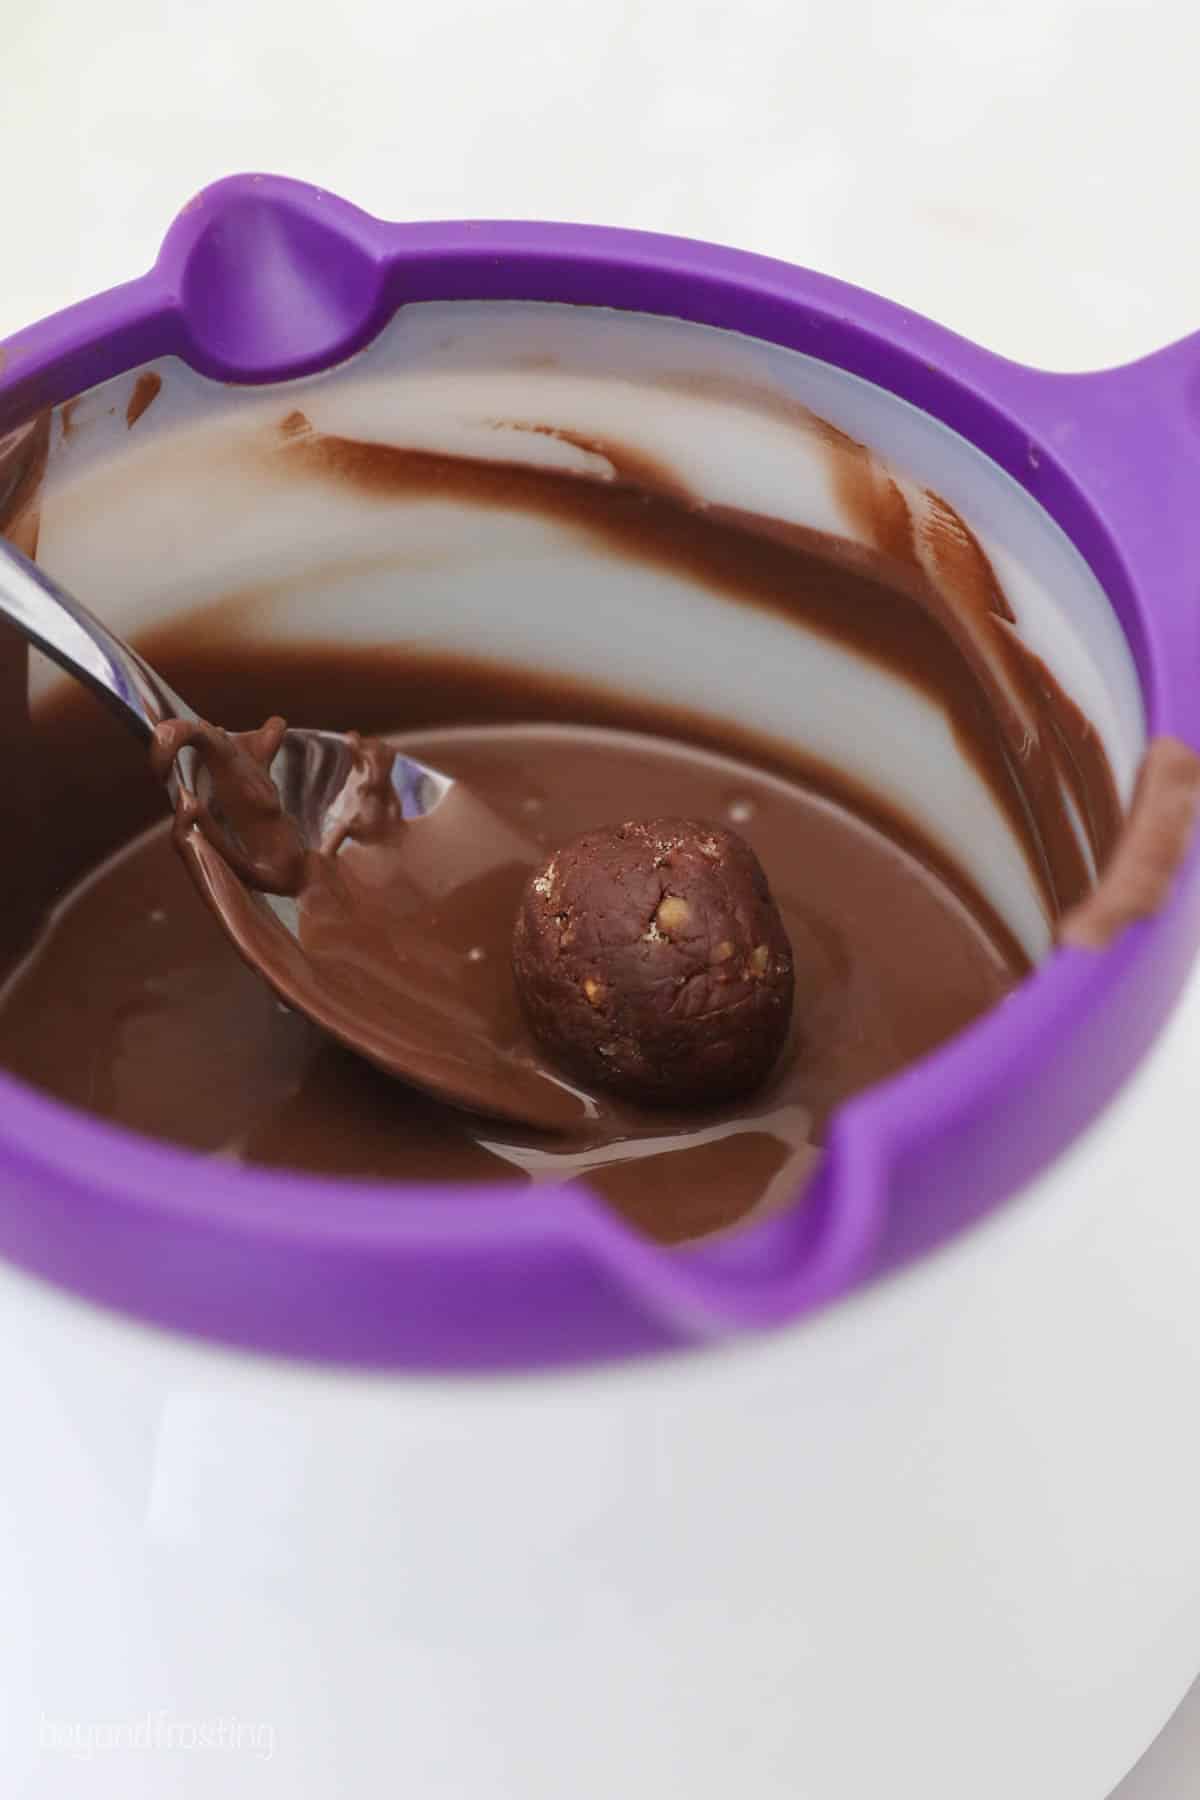 A rum ball being dipped into melted chocolate inside of a Wilton candy melting pot